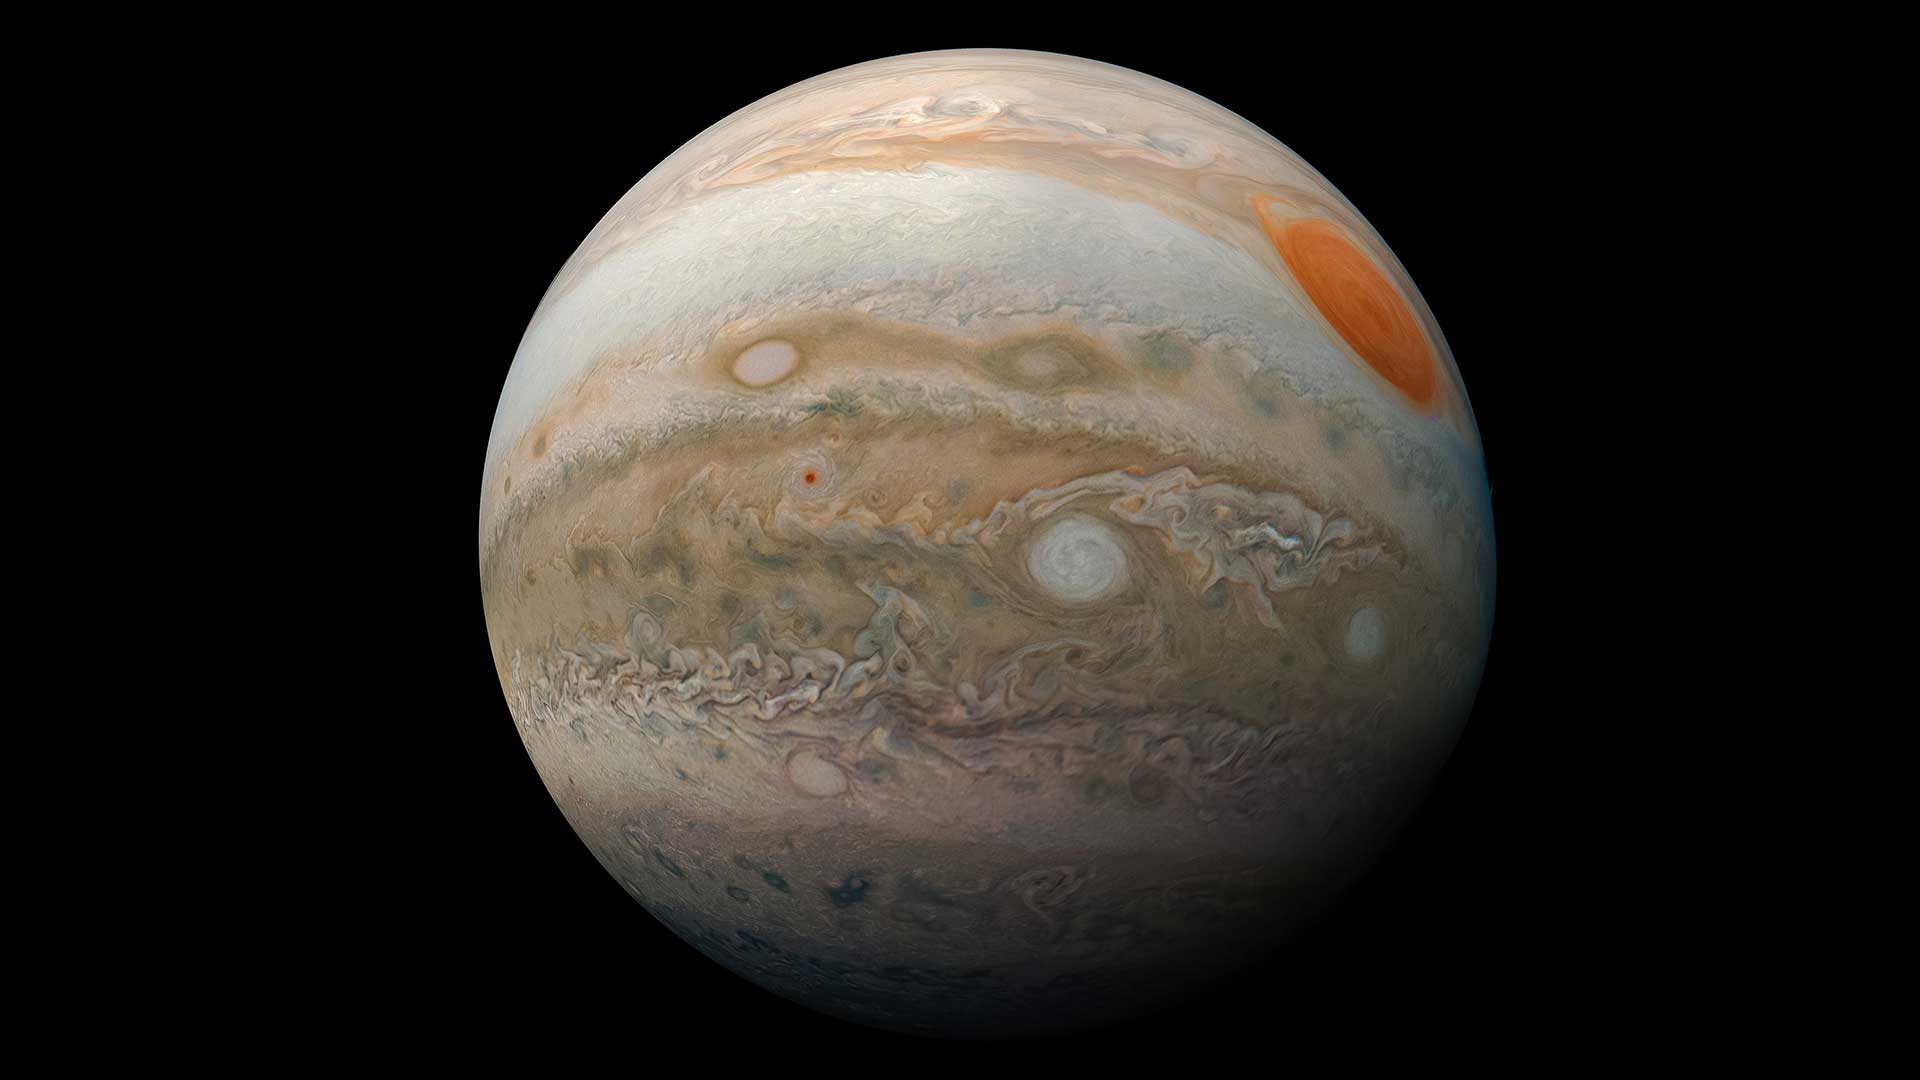 A view of Jupiter's Great Red Spot and colorful cloud bands of tan, brown, white, and orange as seen from the Juno spacecraft.